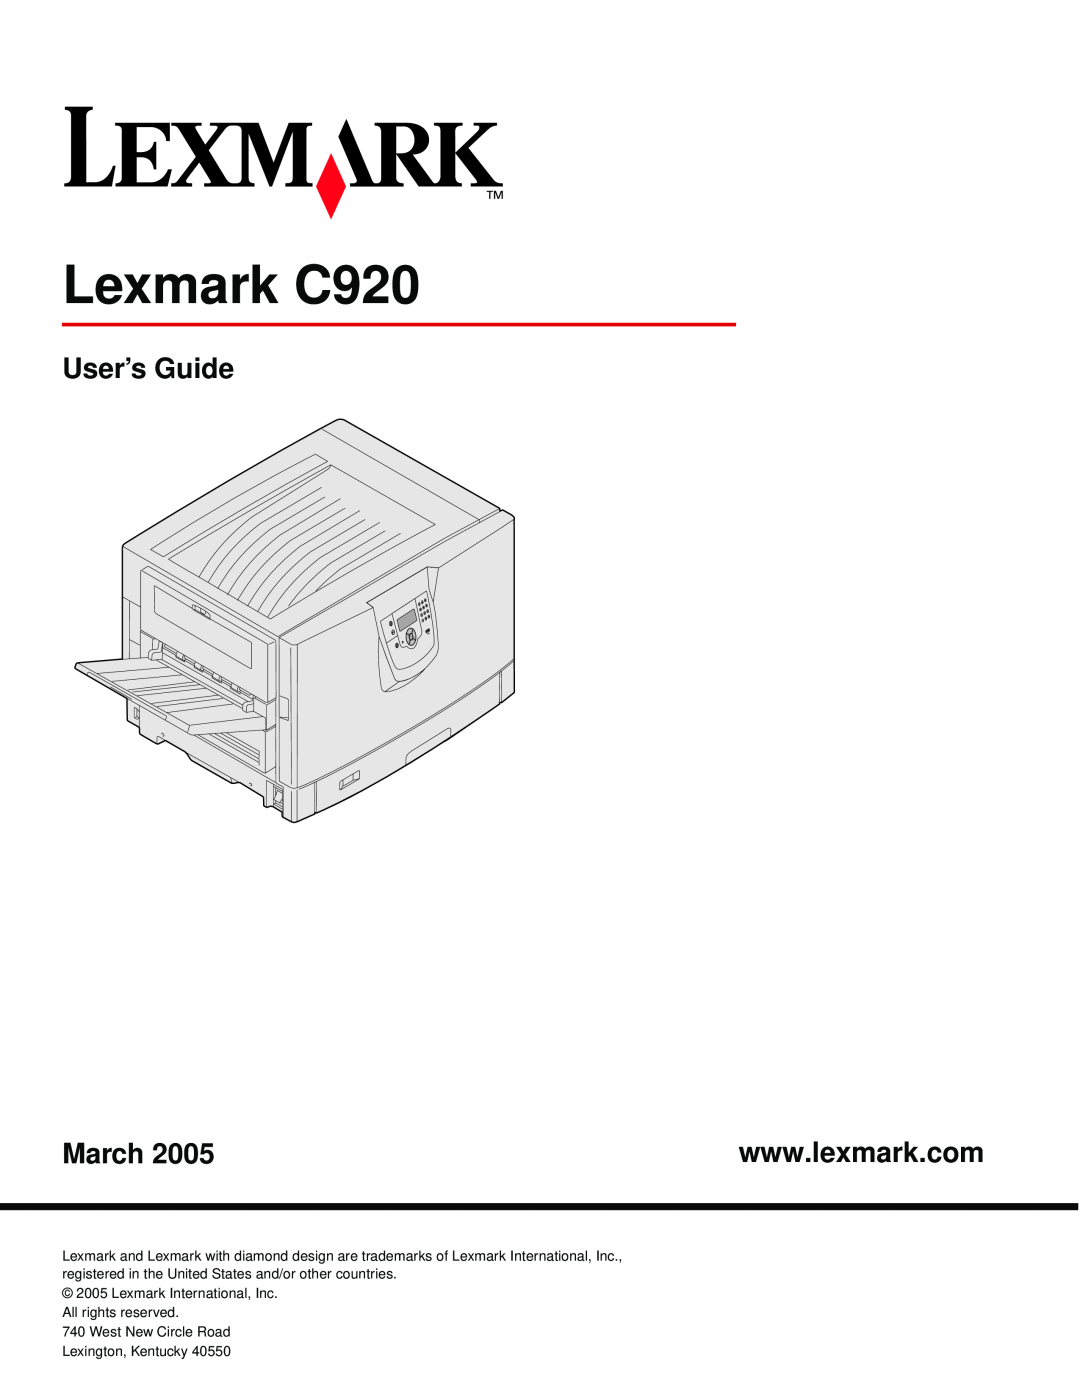 Lexmark manual Lexmark C920, User’s Guide, March, Lexmark International, Inc. All rights reserved 